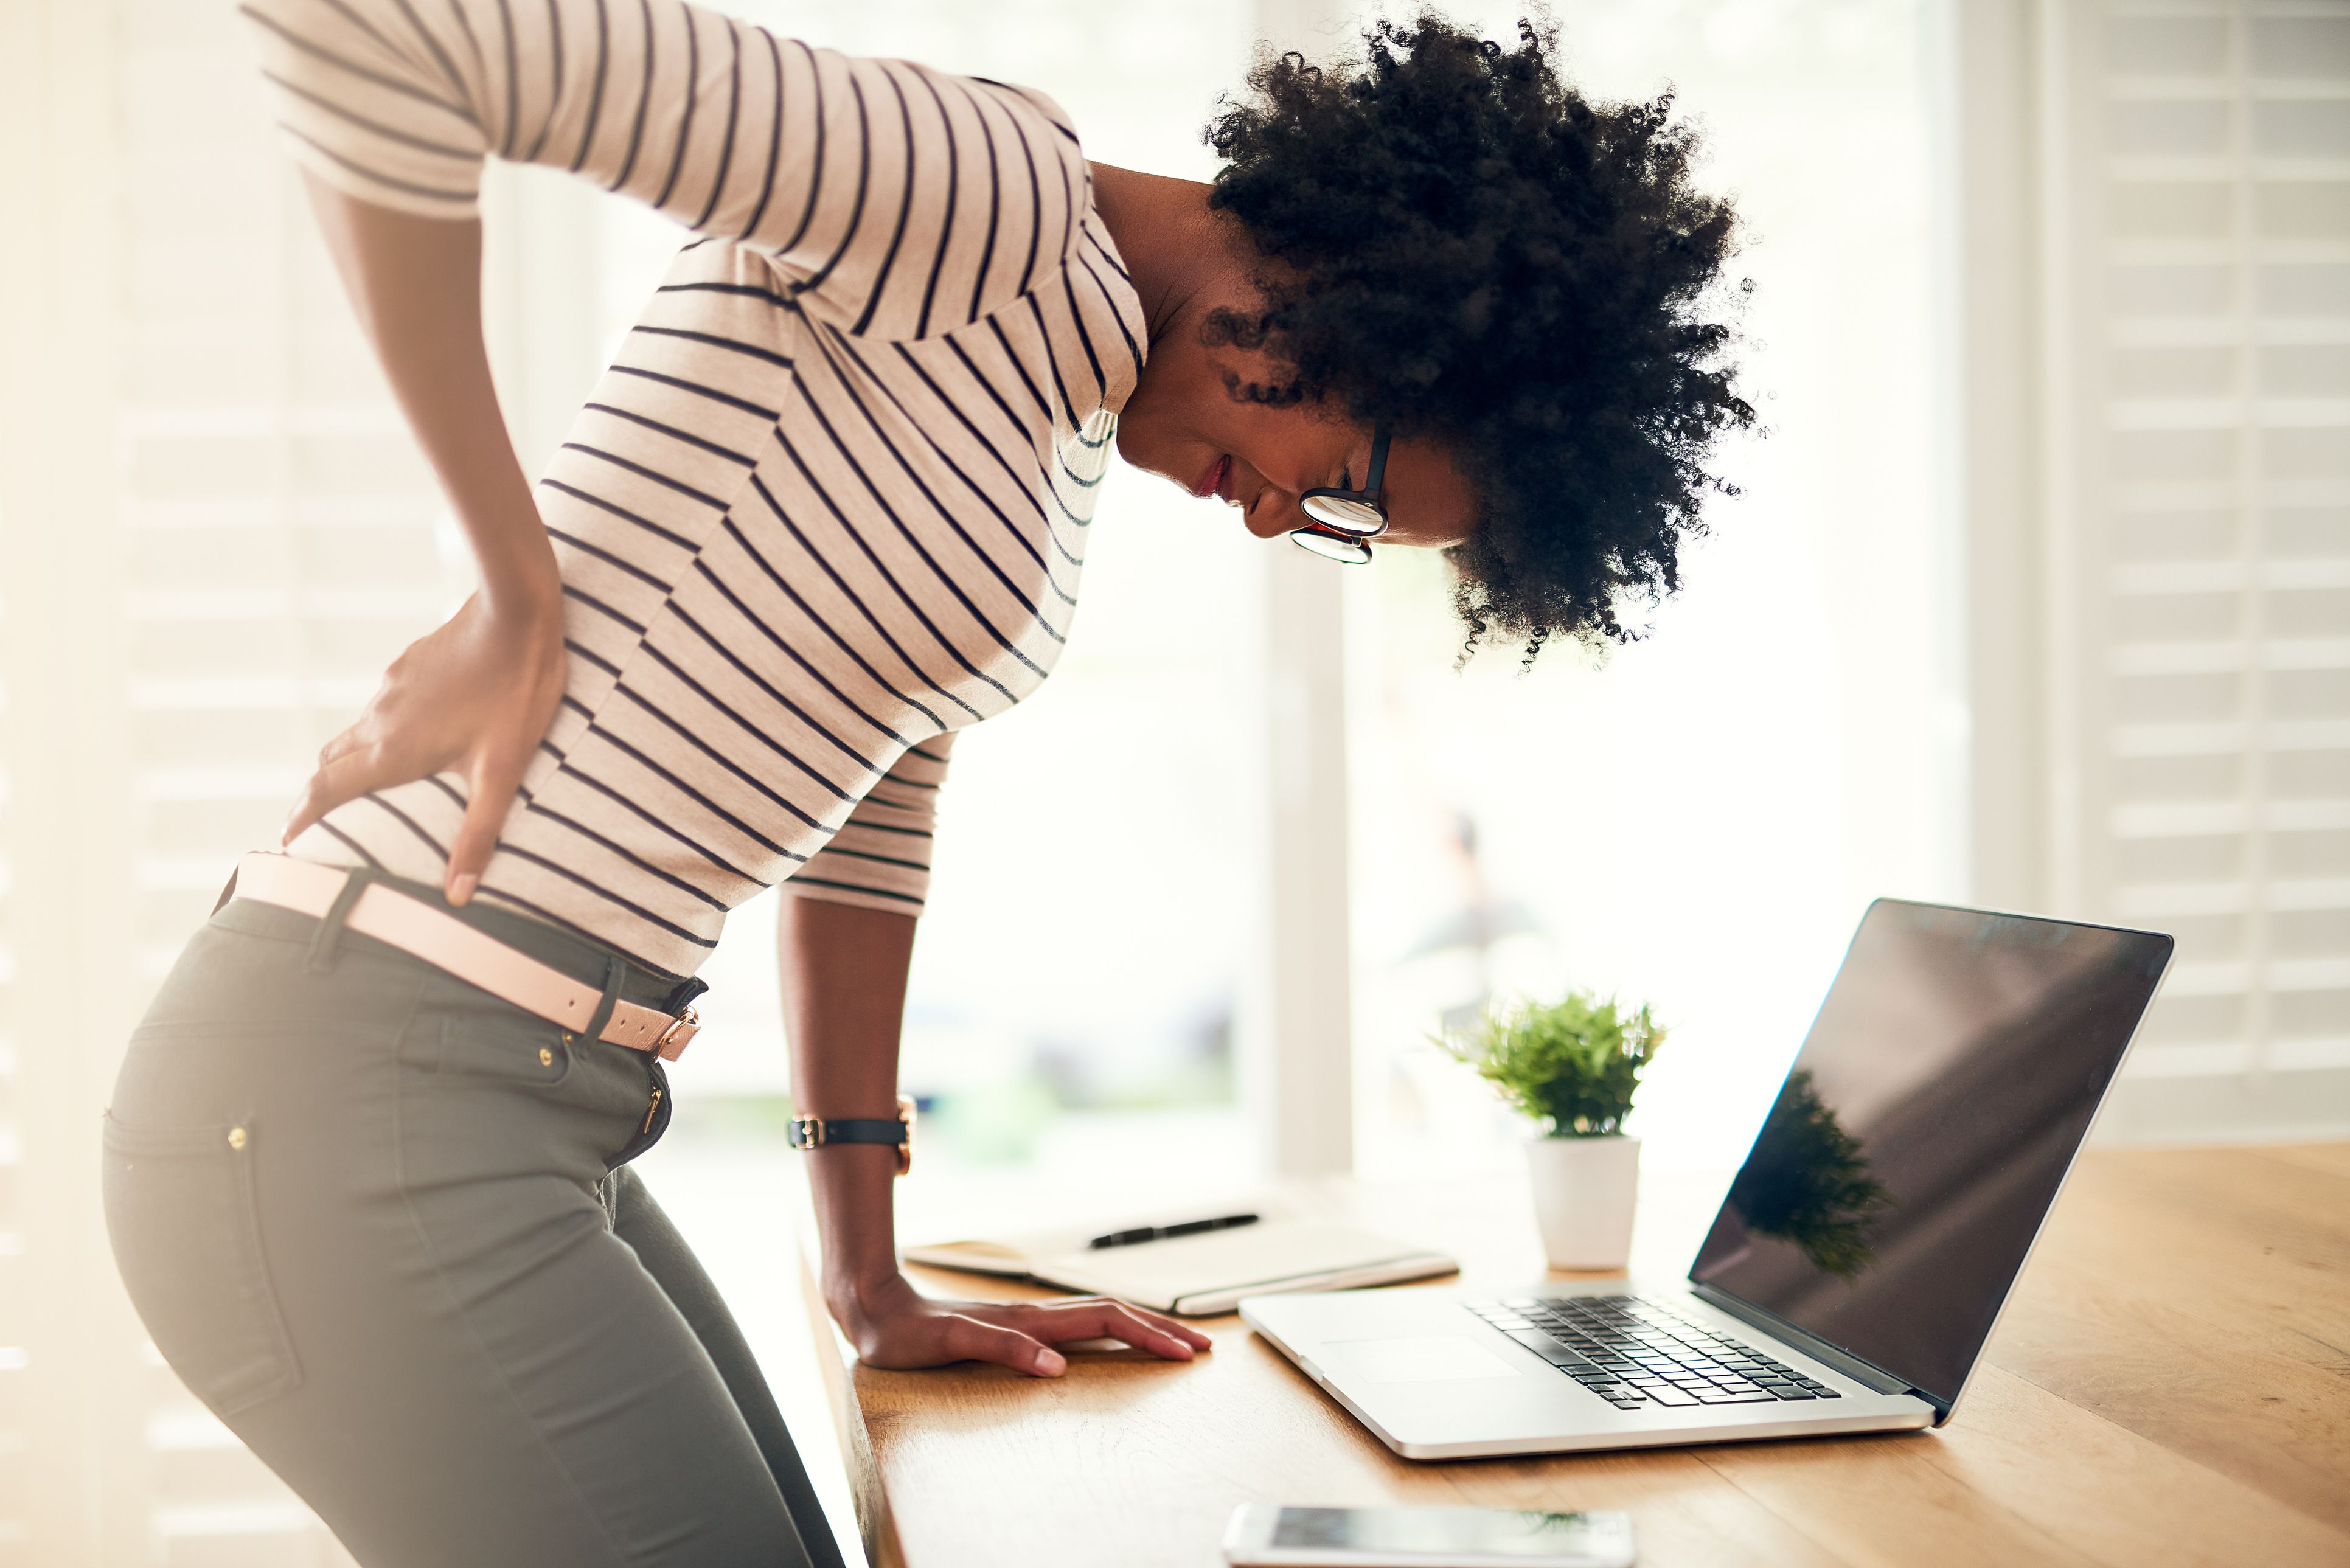 Can Poor Posture Result in Back Pain? A Physical Therapist Explains